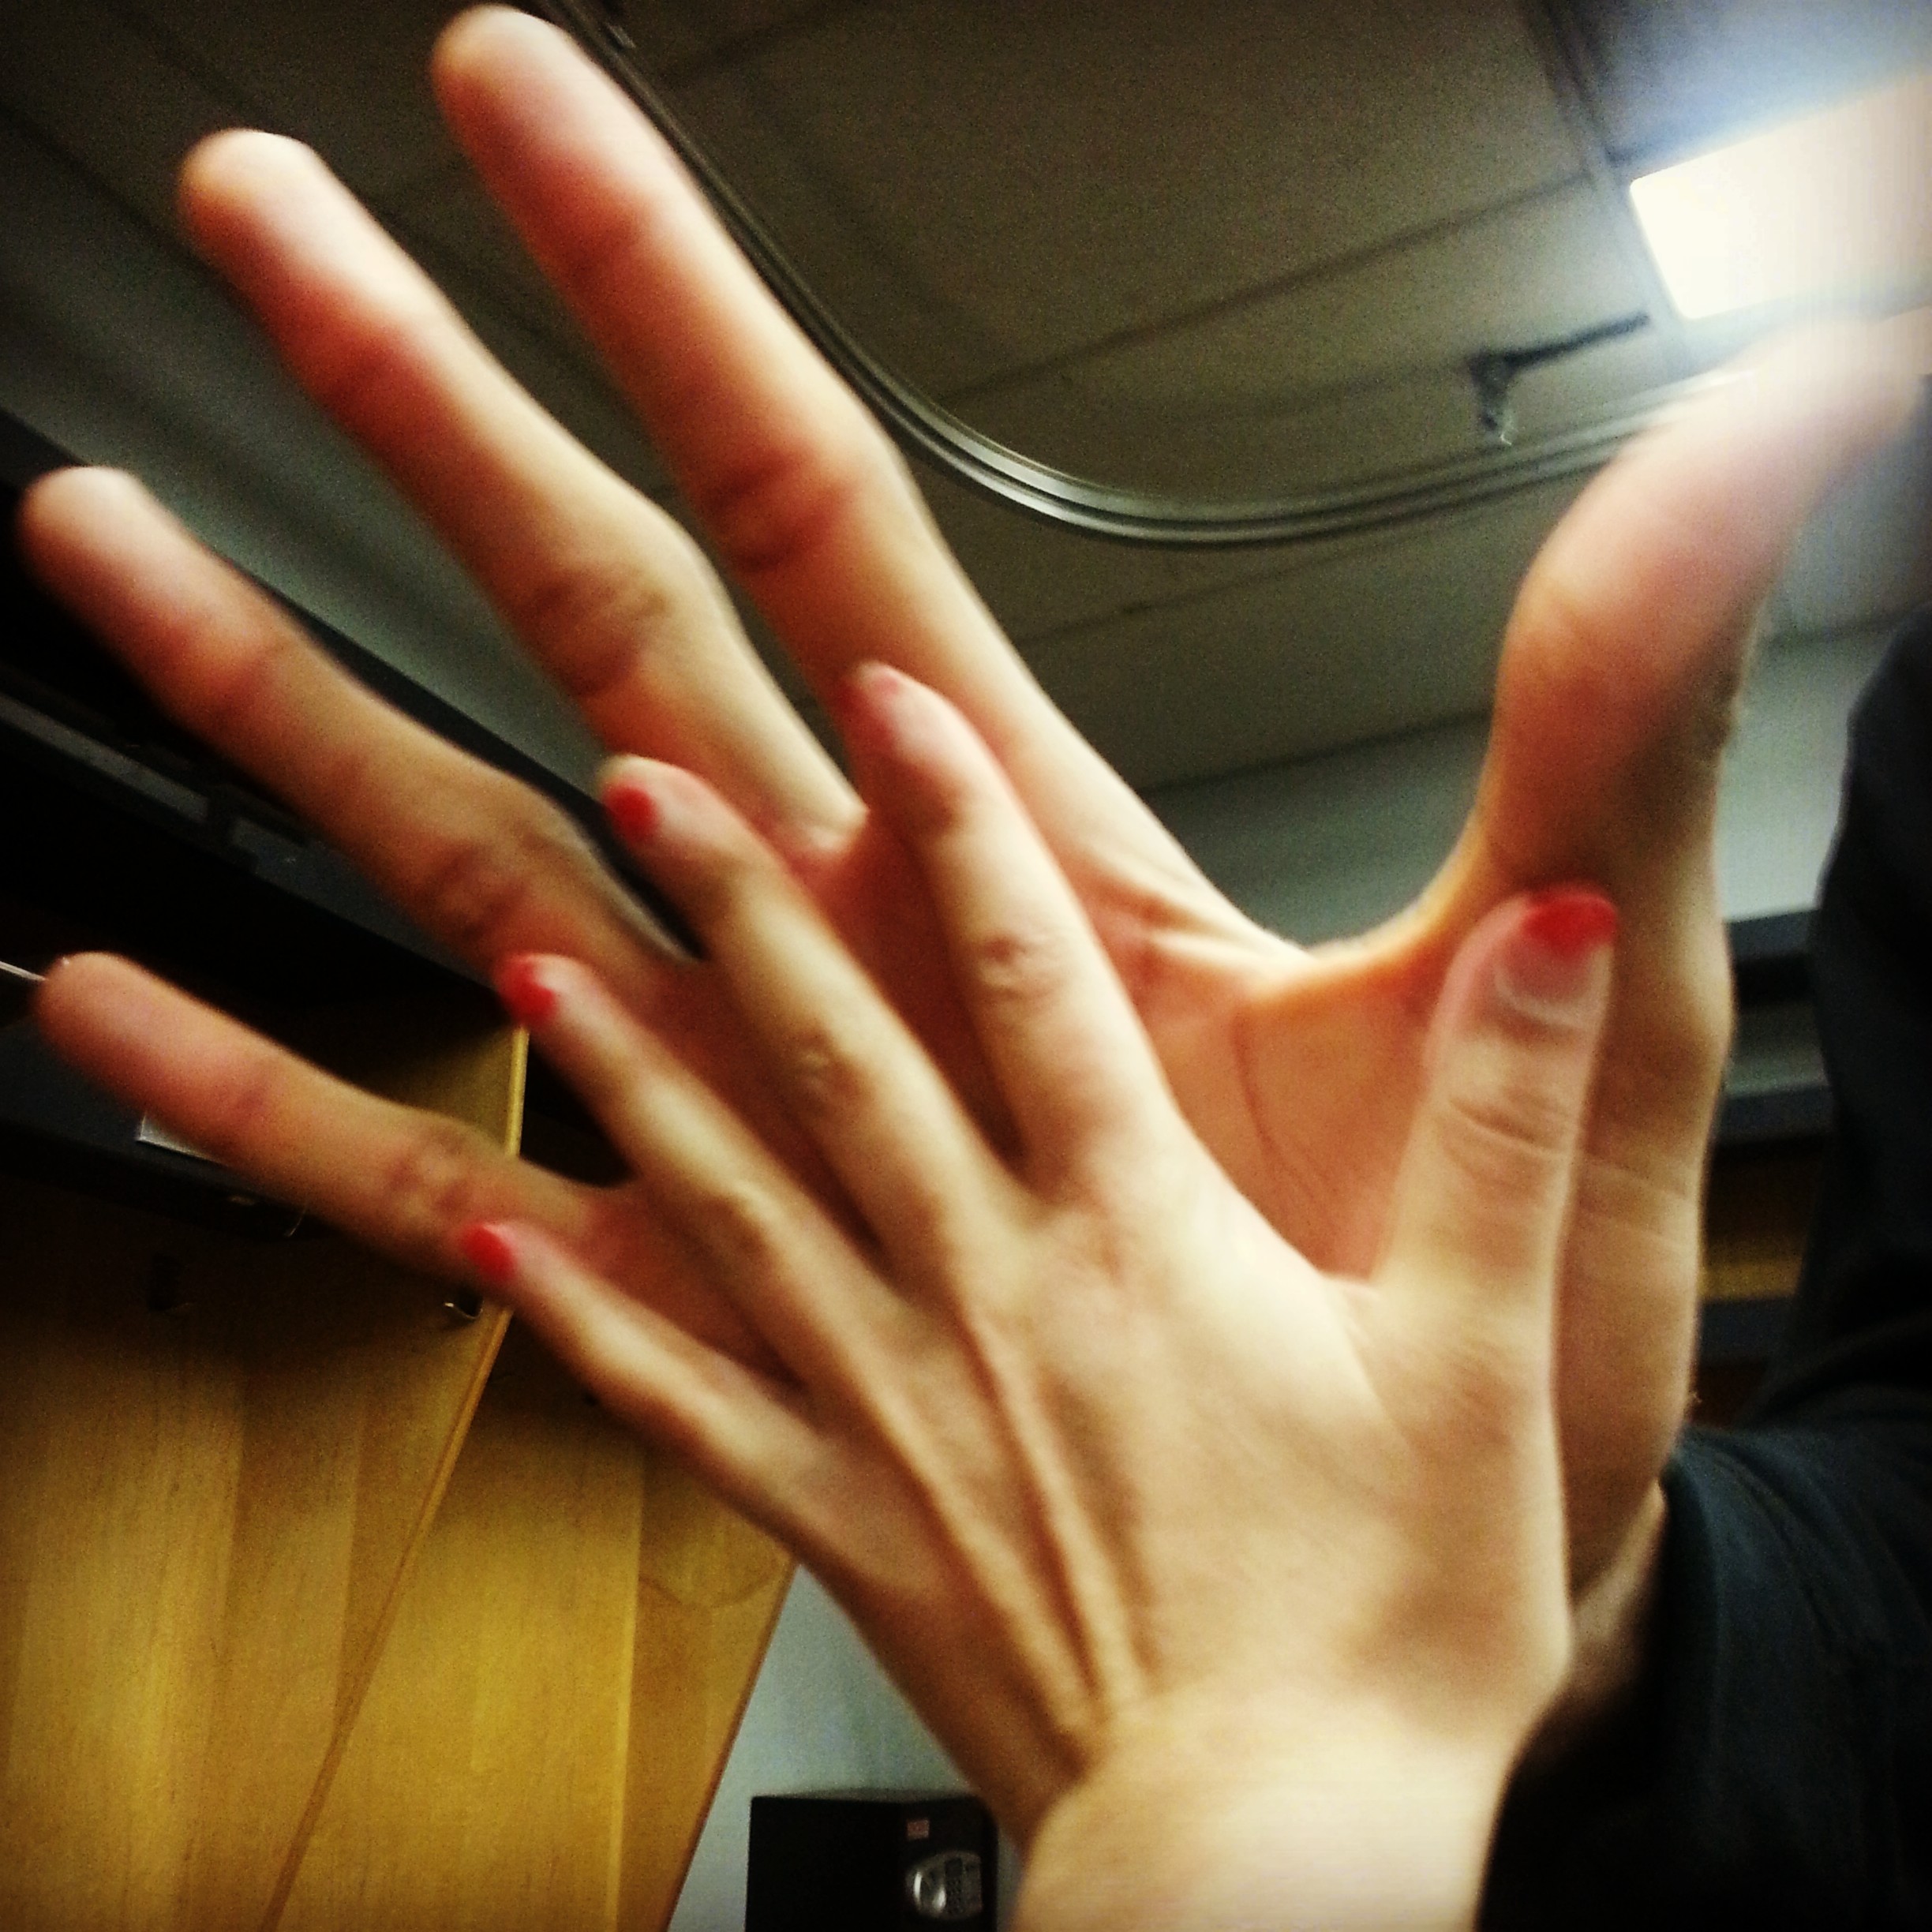 Tiny reporter comparing hands with NBA Player, Giannis Antekounmpo